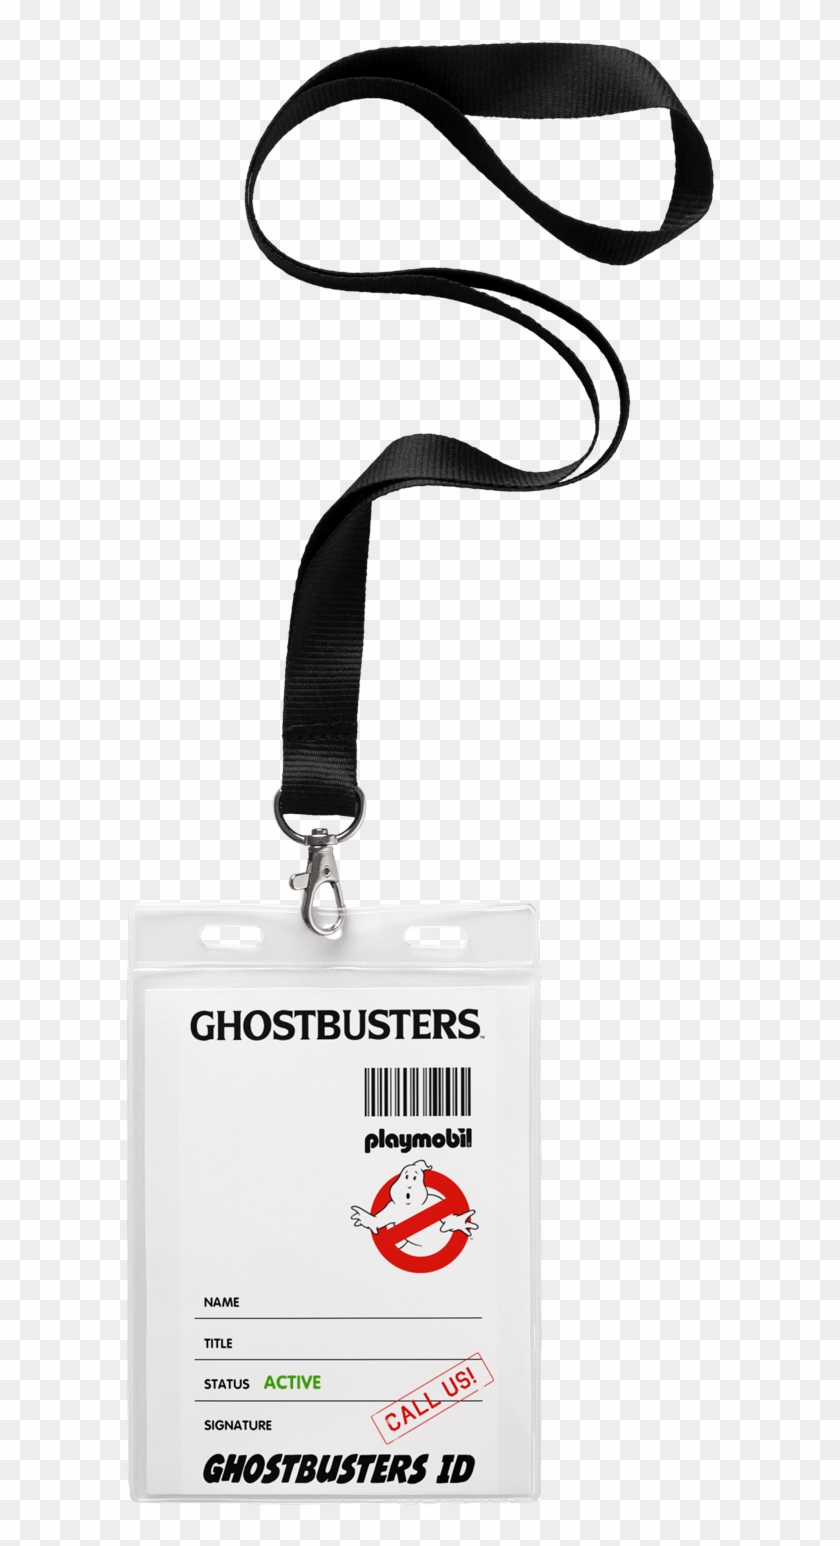 Ausweis - Ghostbusters Clipart #701404